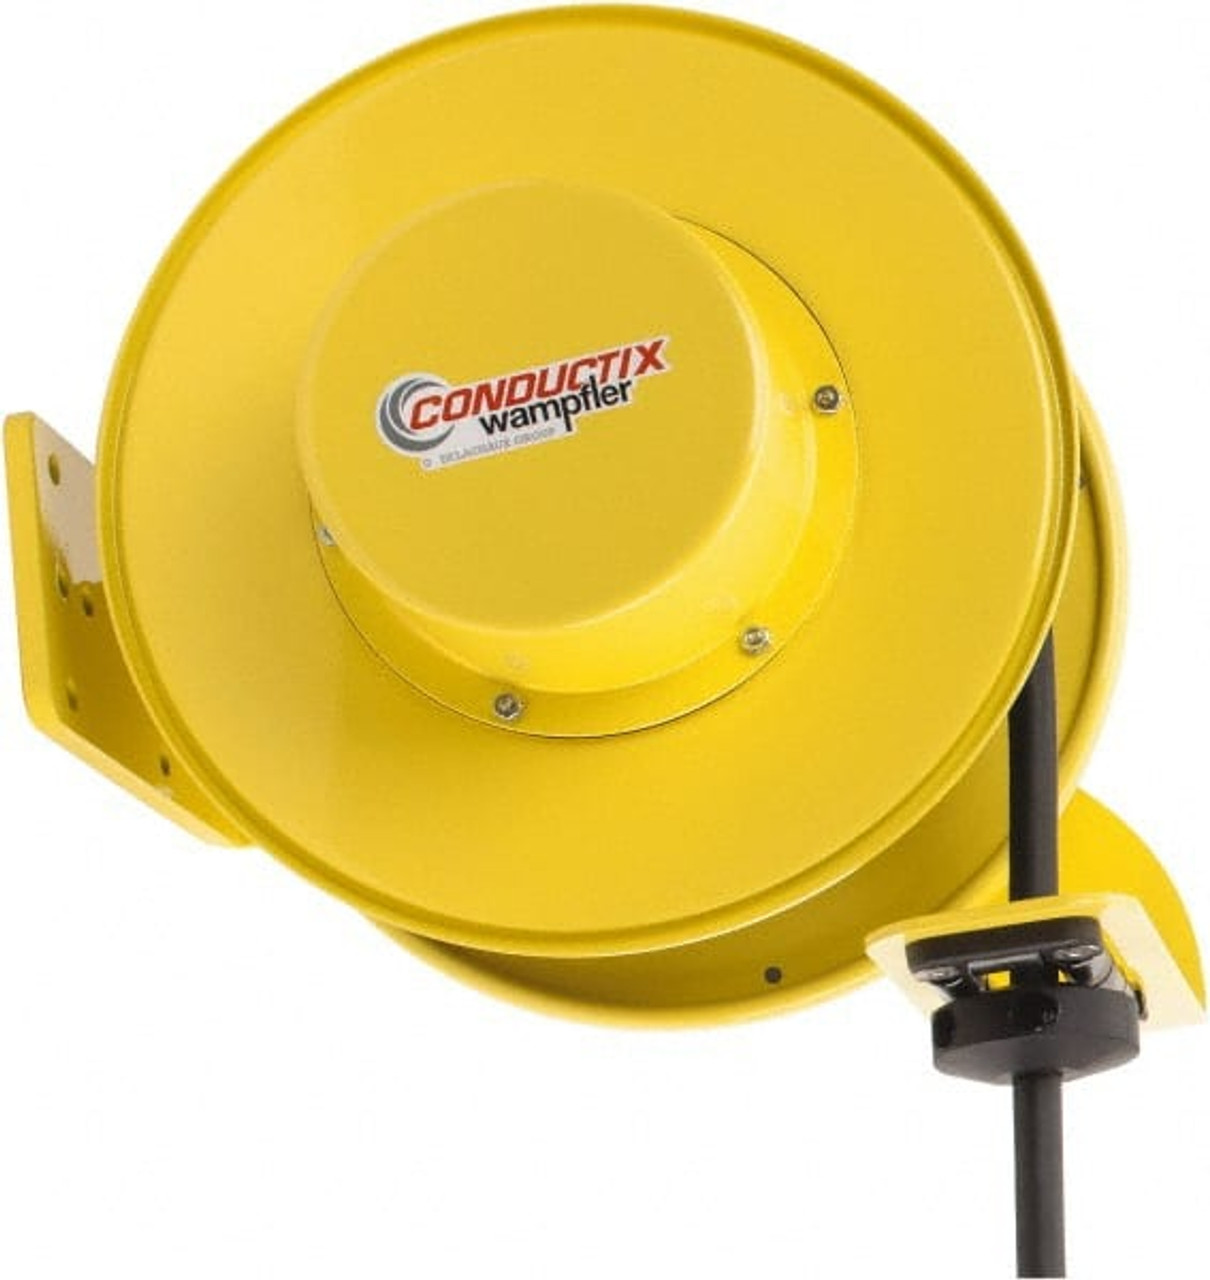 Conductix-Wampfler 10 AWG, 50 ft. Cable Length, Cord & Cable Reel with Bare  End 4 Outlets, NEMA 5-20R, 20 Amps, SEOW-A Cable, Yellow Reel, Spring  Driven Reel 142100405011 - 73126856 - Penn Tool Co., Inc